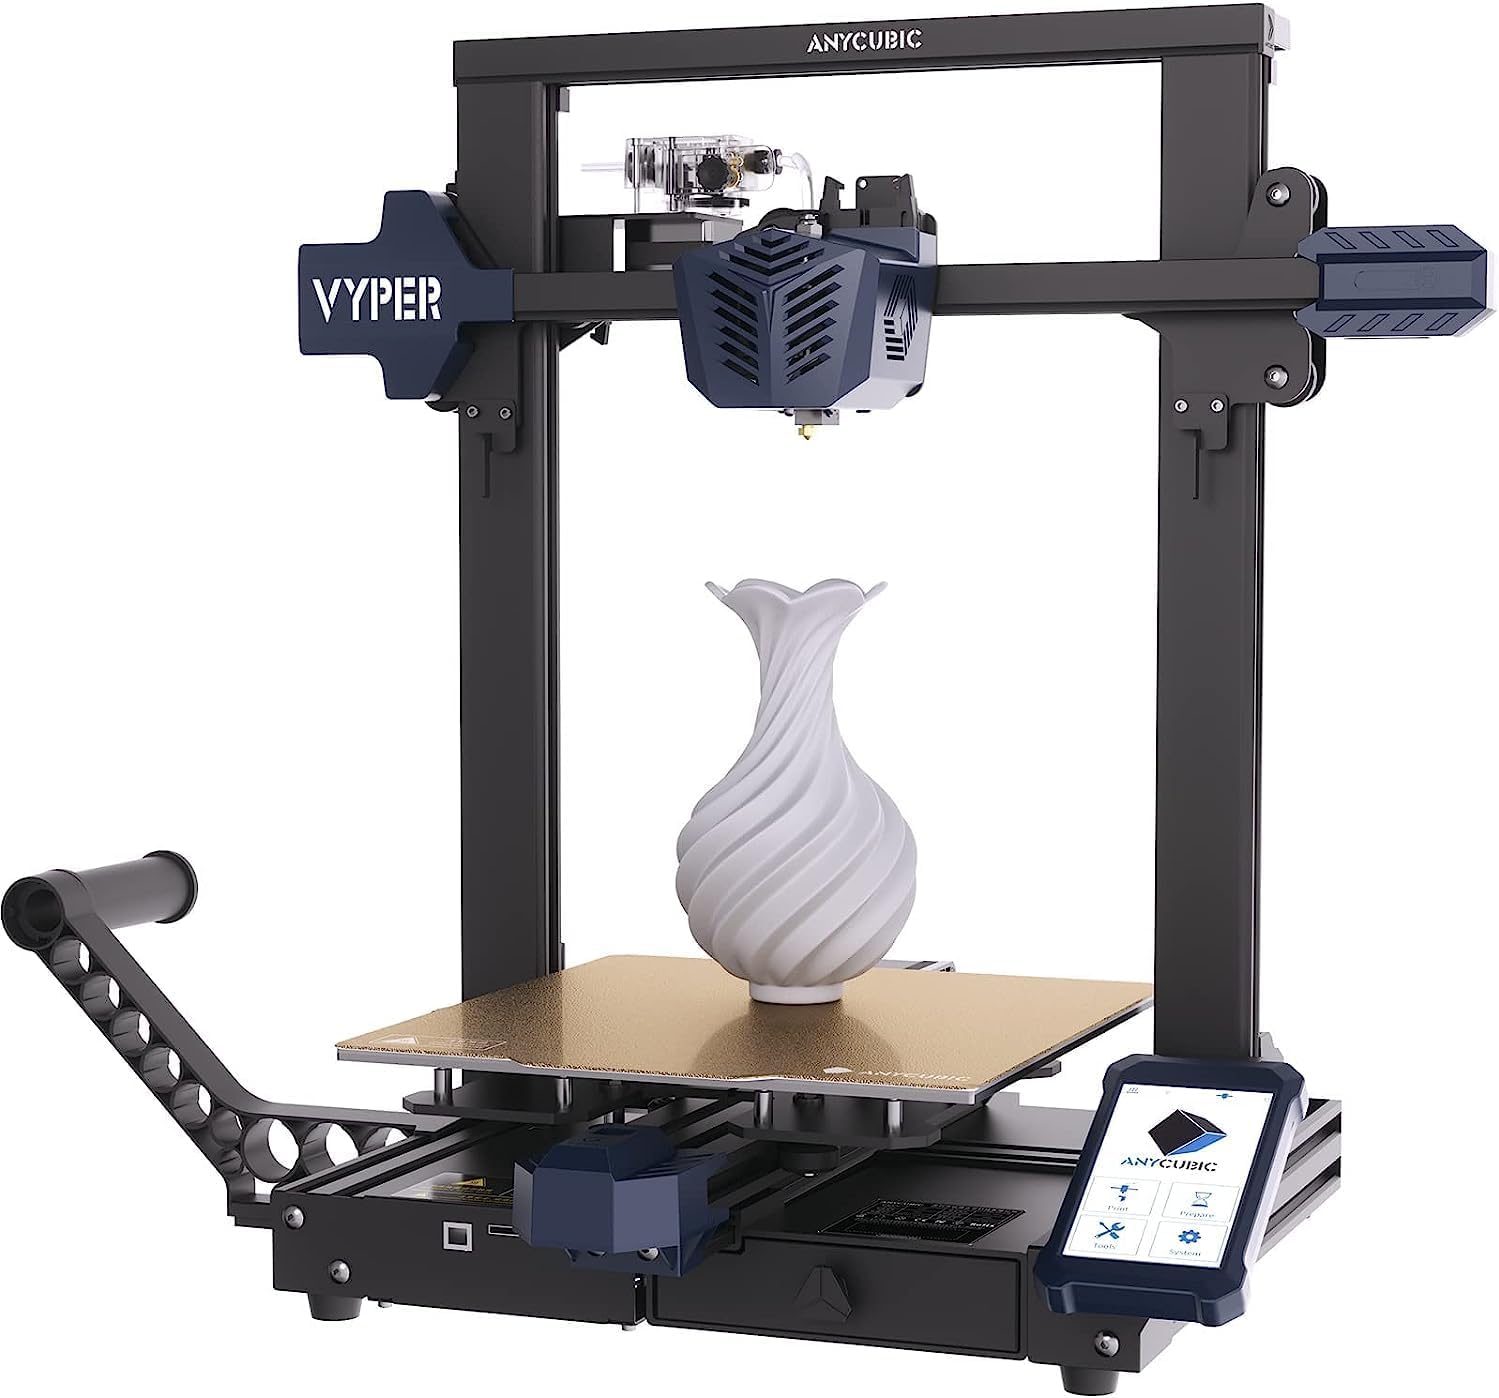 ANYCUBIC Vyper, Upgrade Intelligent Auto Leveling 3D [...]